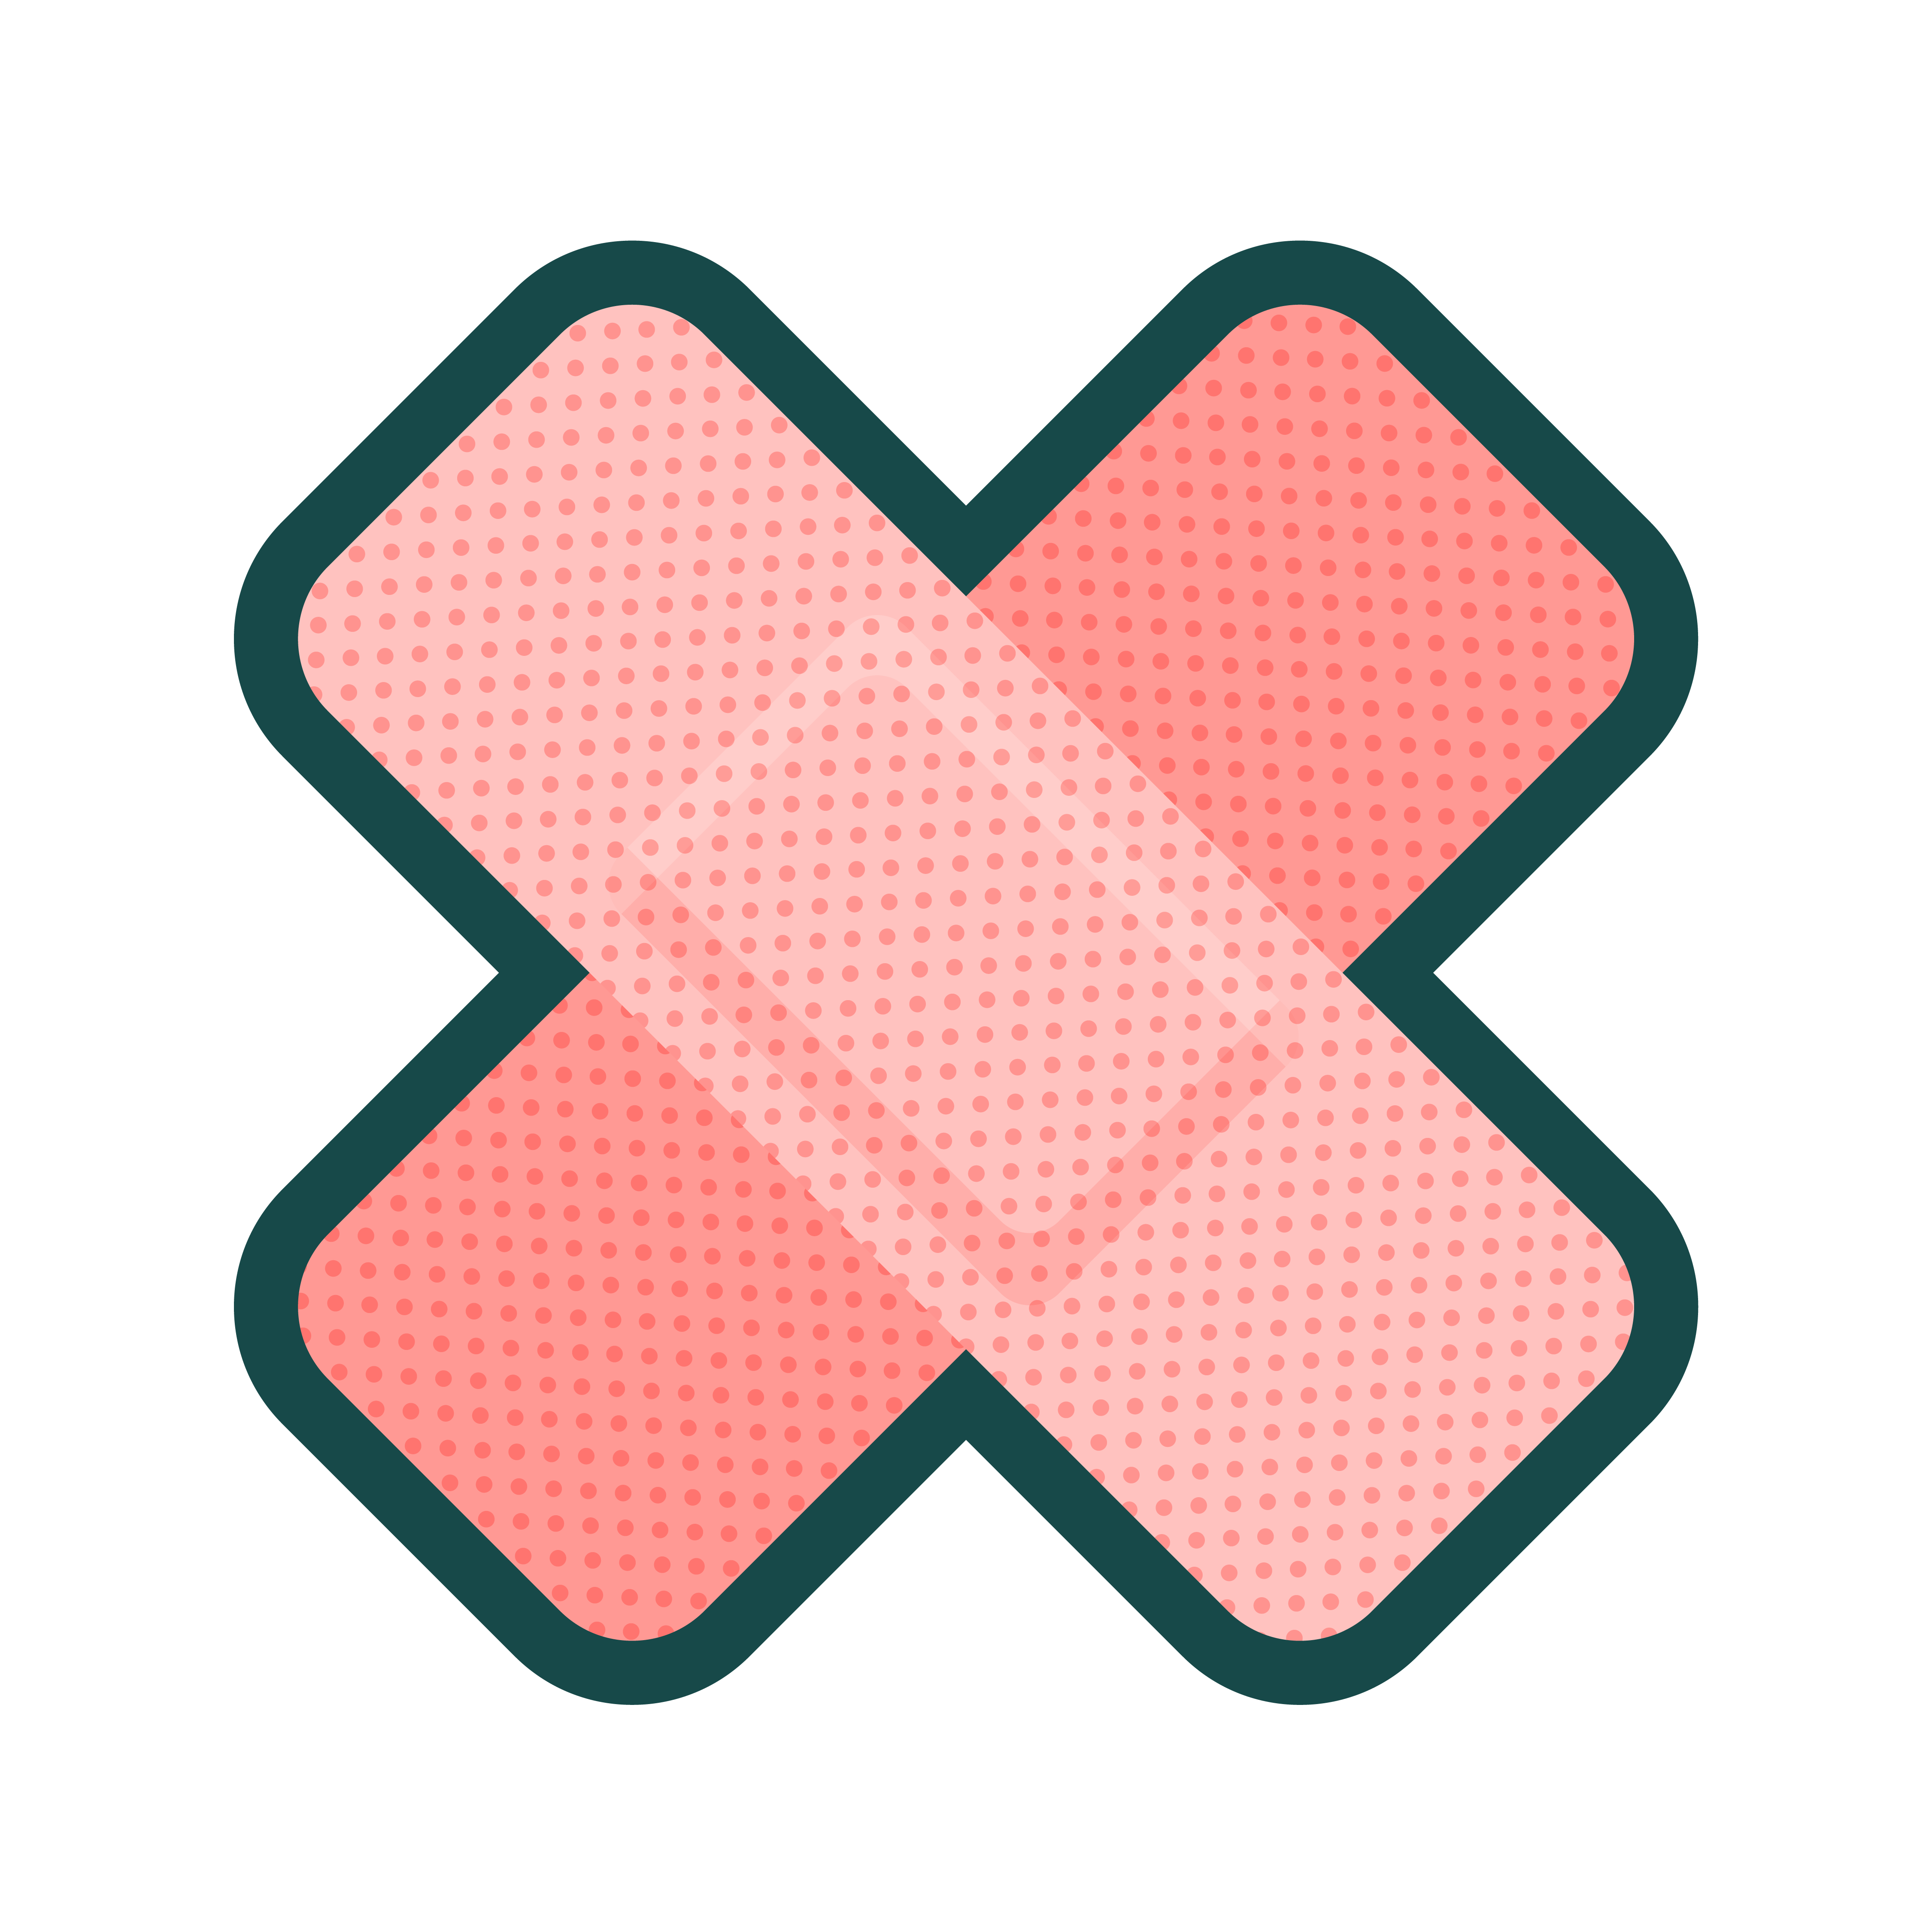 an illustration of two pink band-aids crossed to form an x